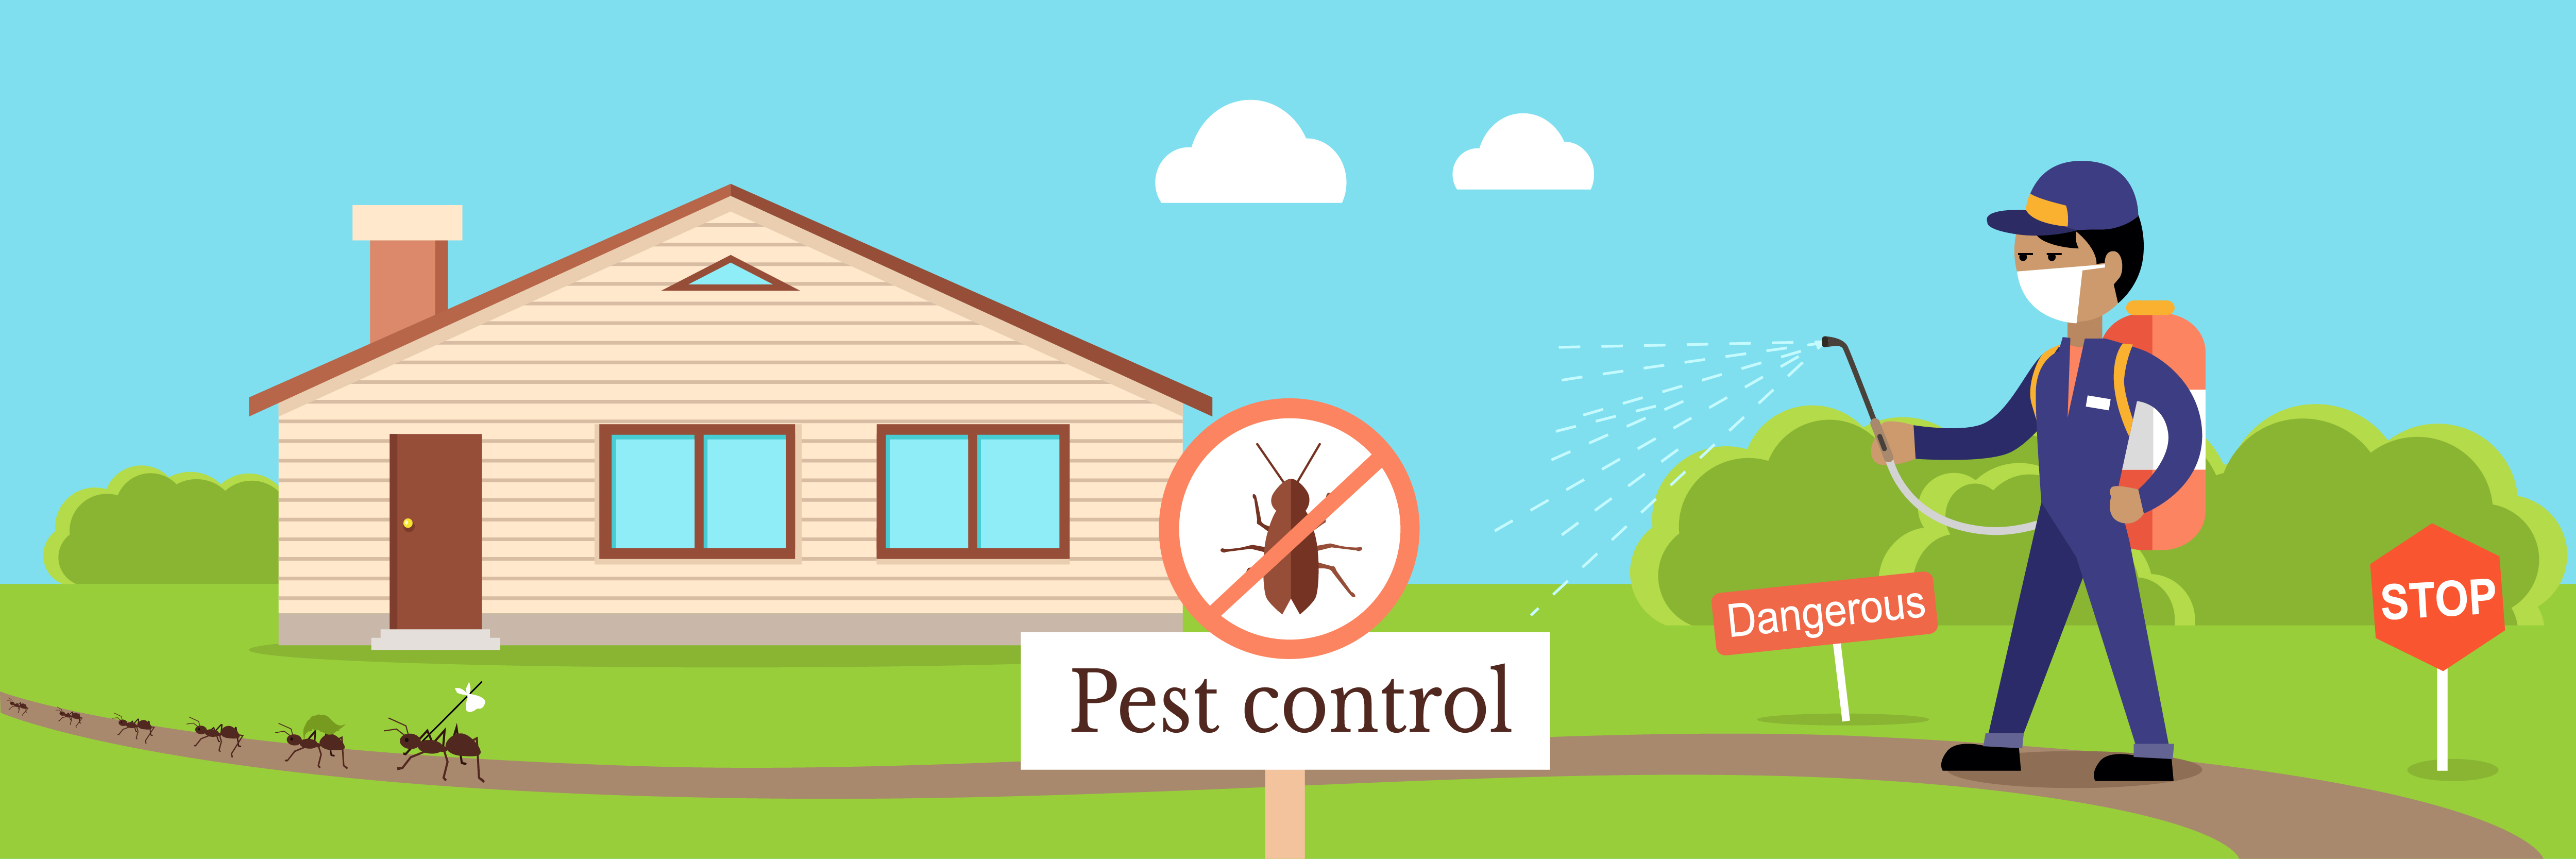 Phinished Pest Control Services